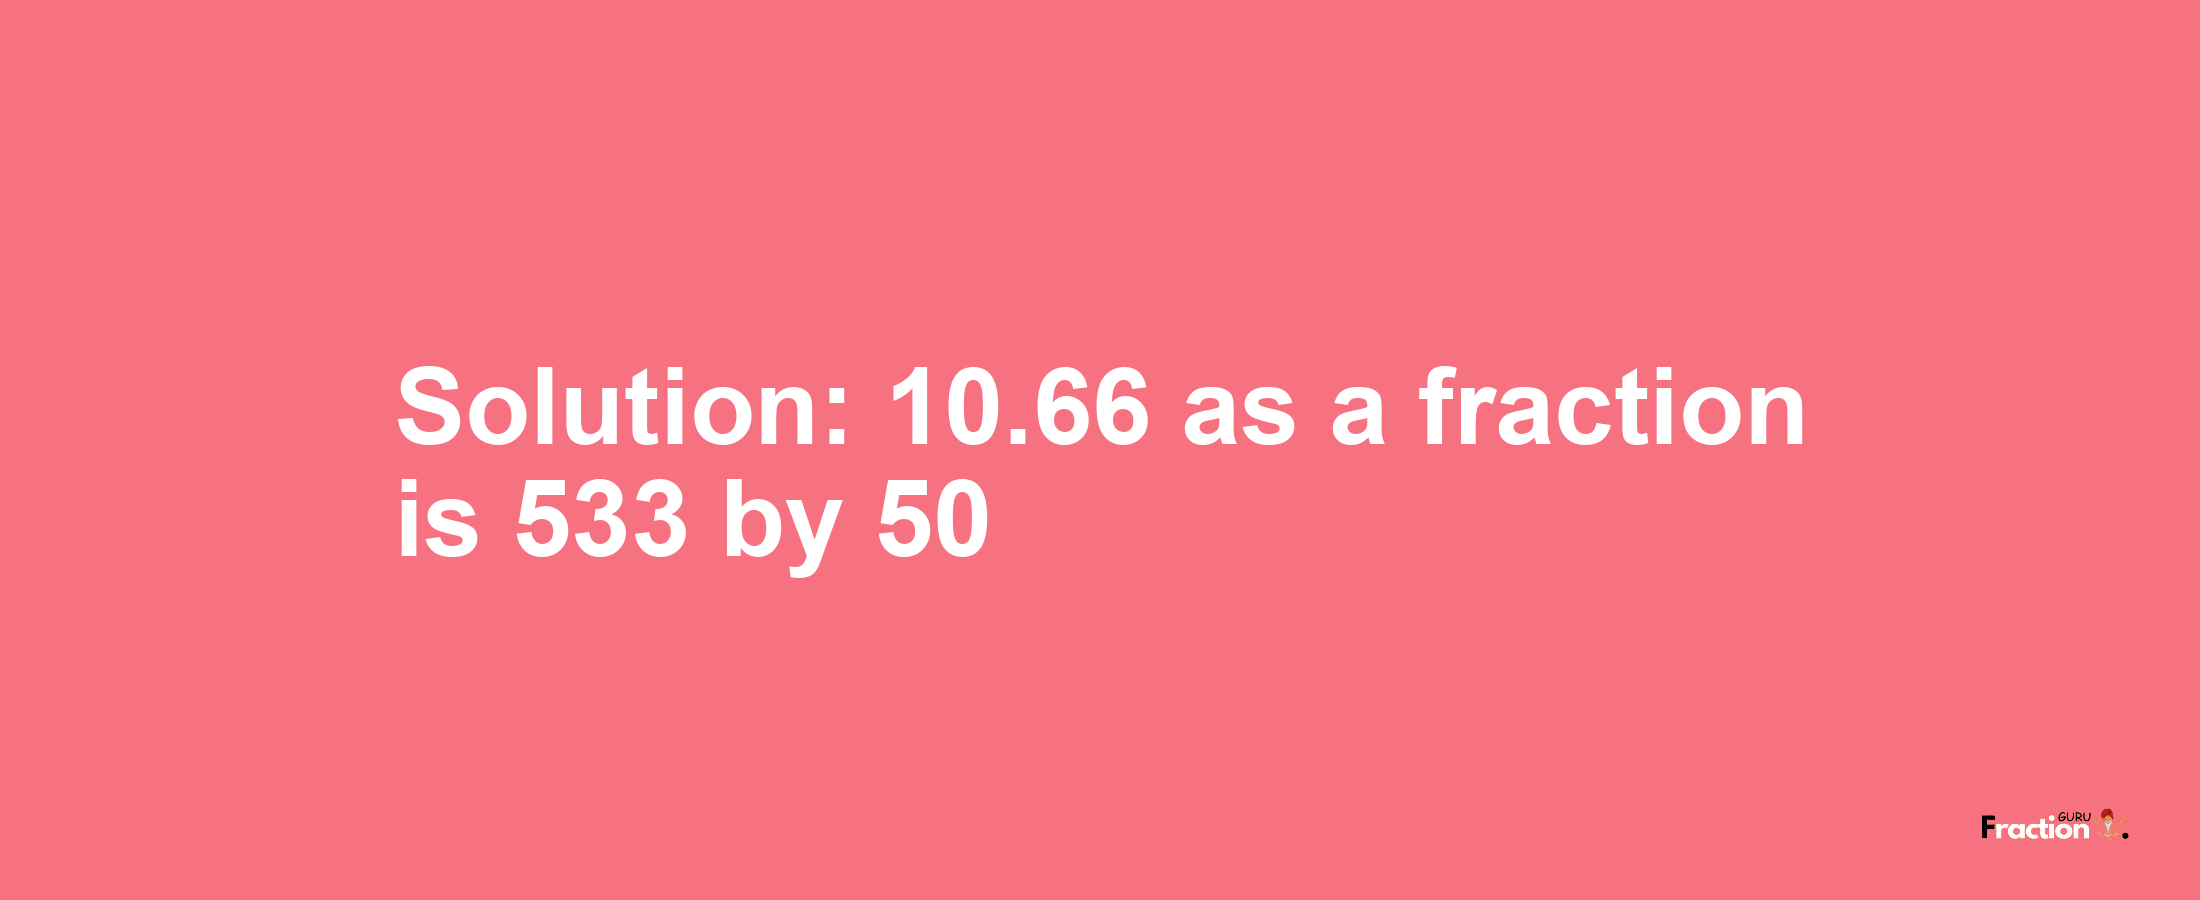 Solution:10.66 as a fraction is 533/50